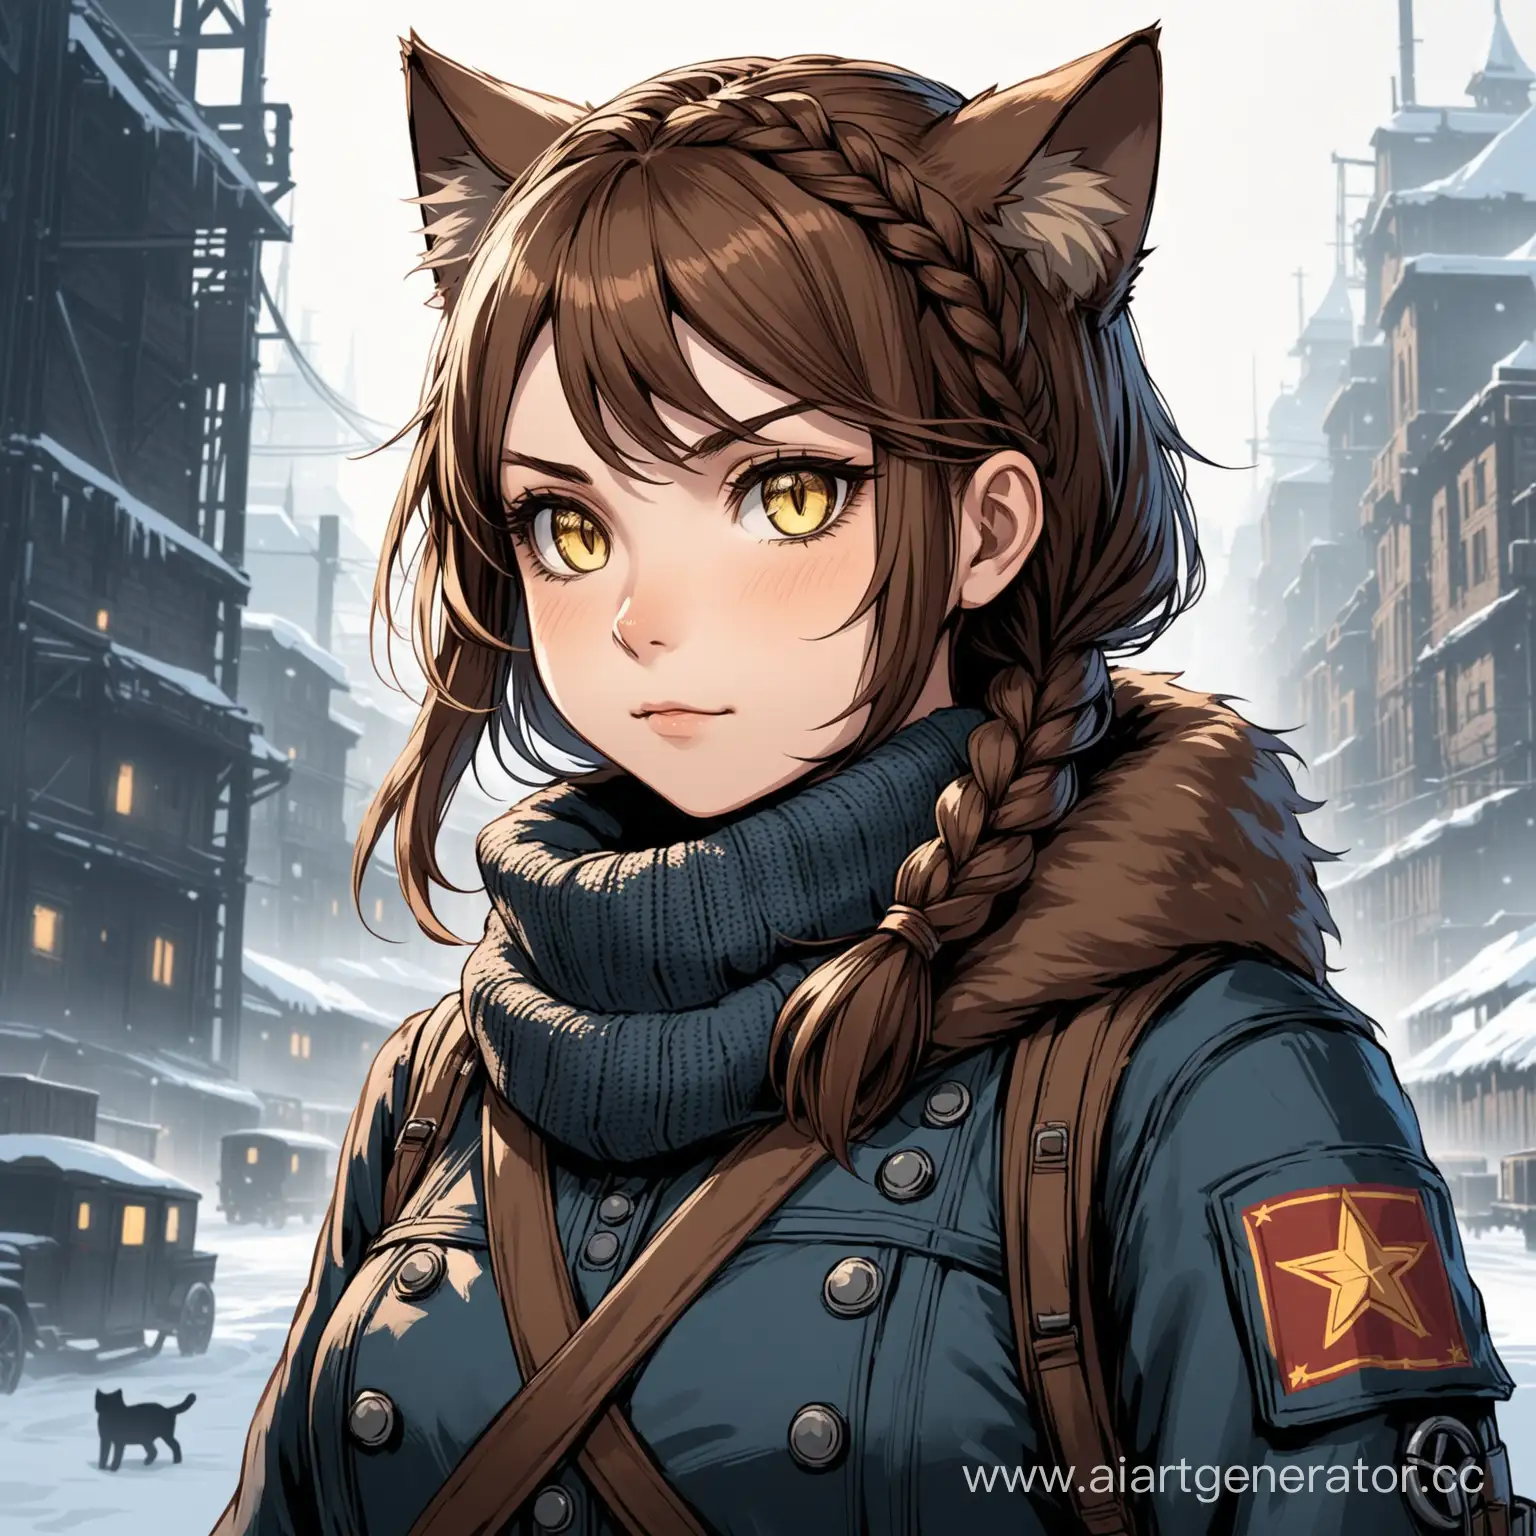 Catgirl-with-Brown-Hair-and-Communist-Aesthetic-in-Frostpunk-Setting